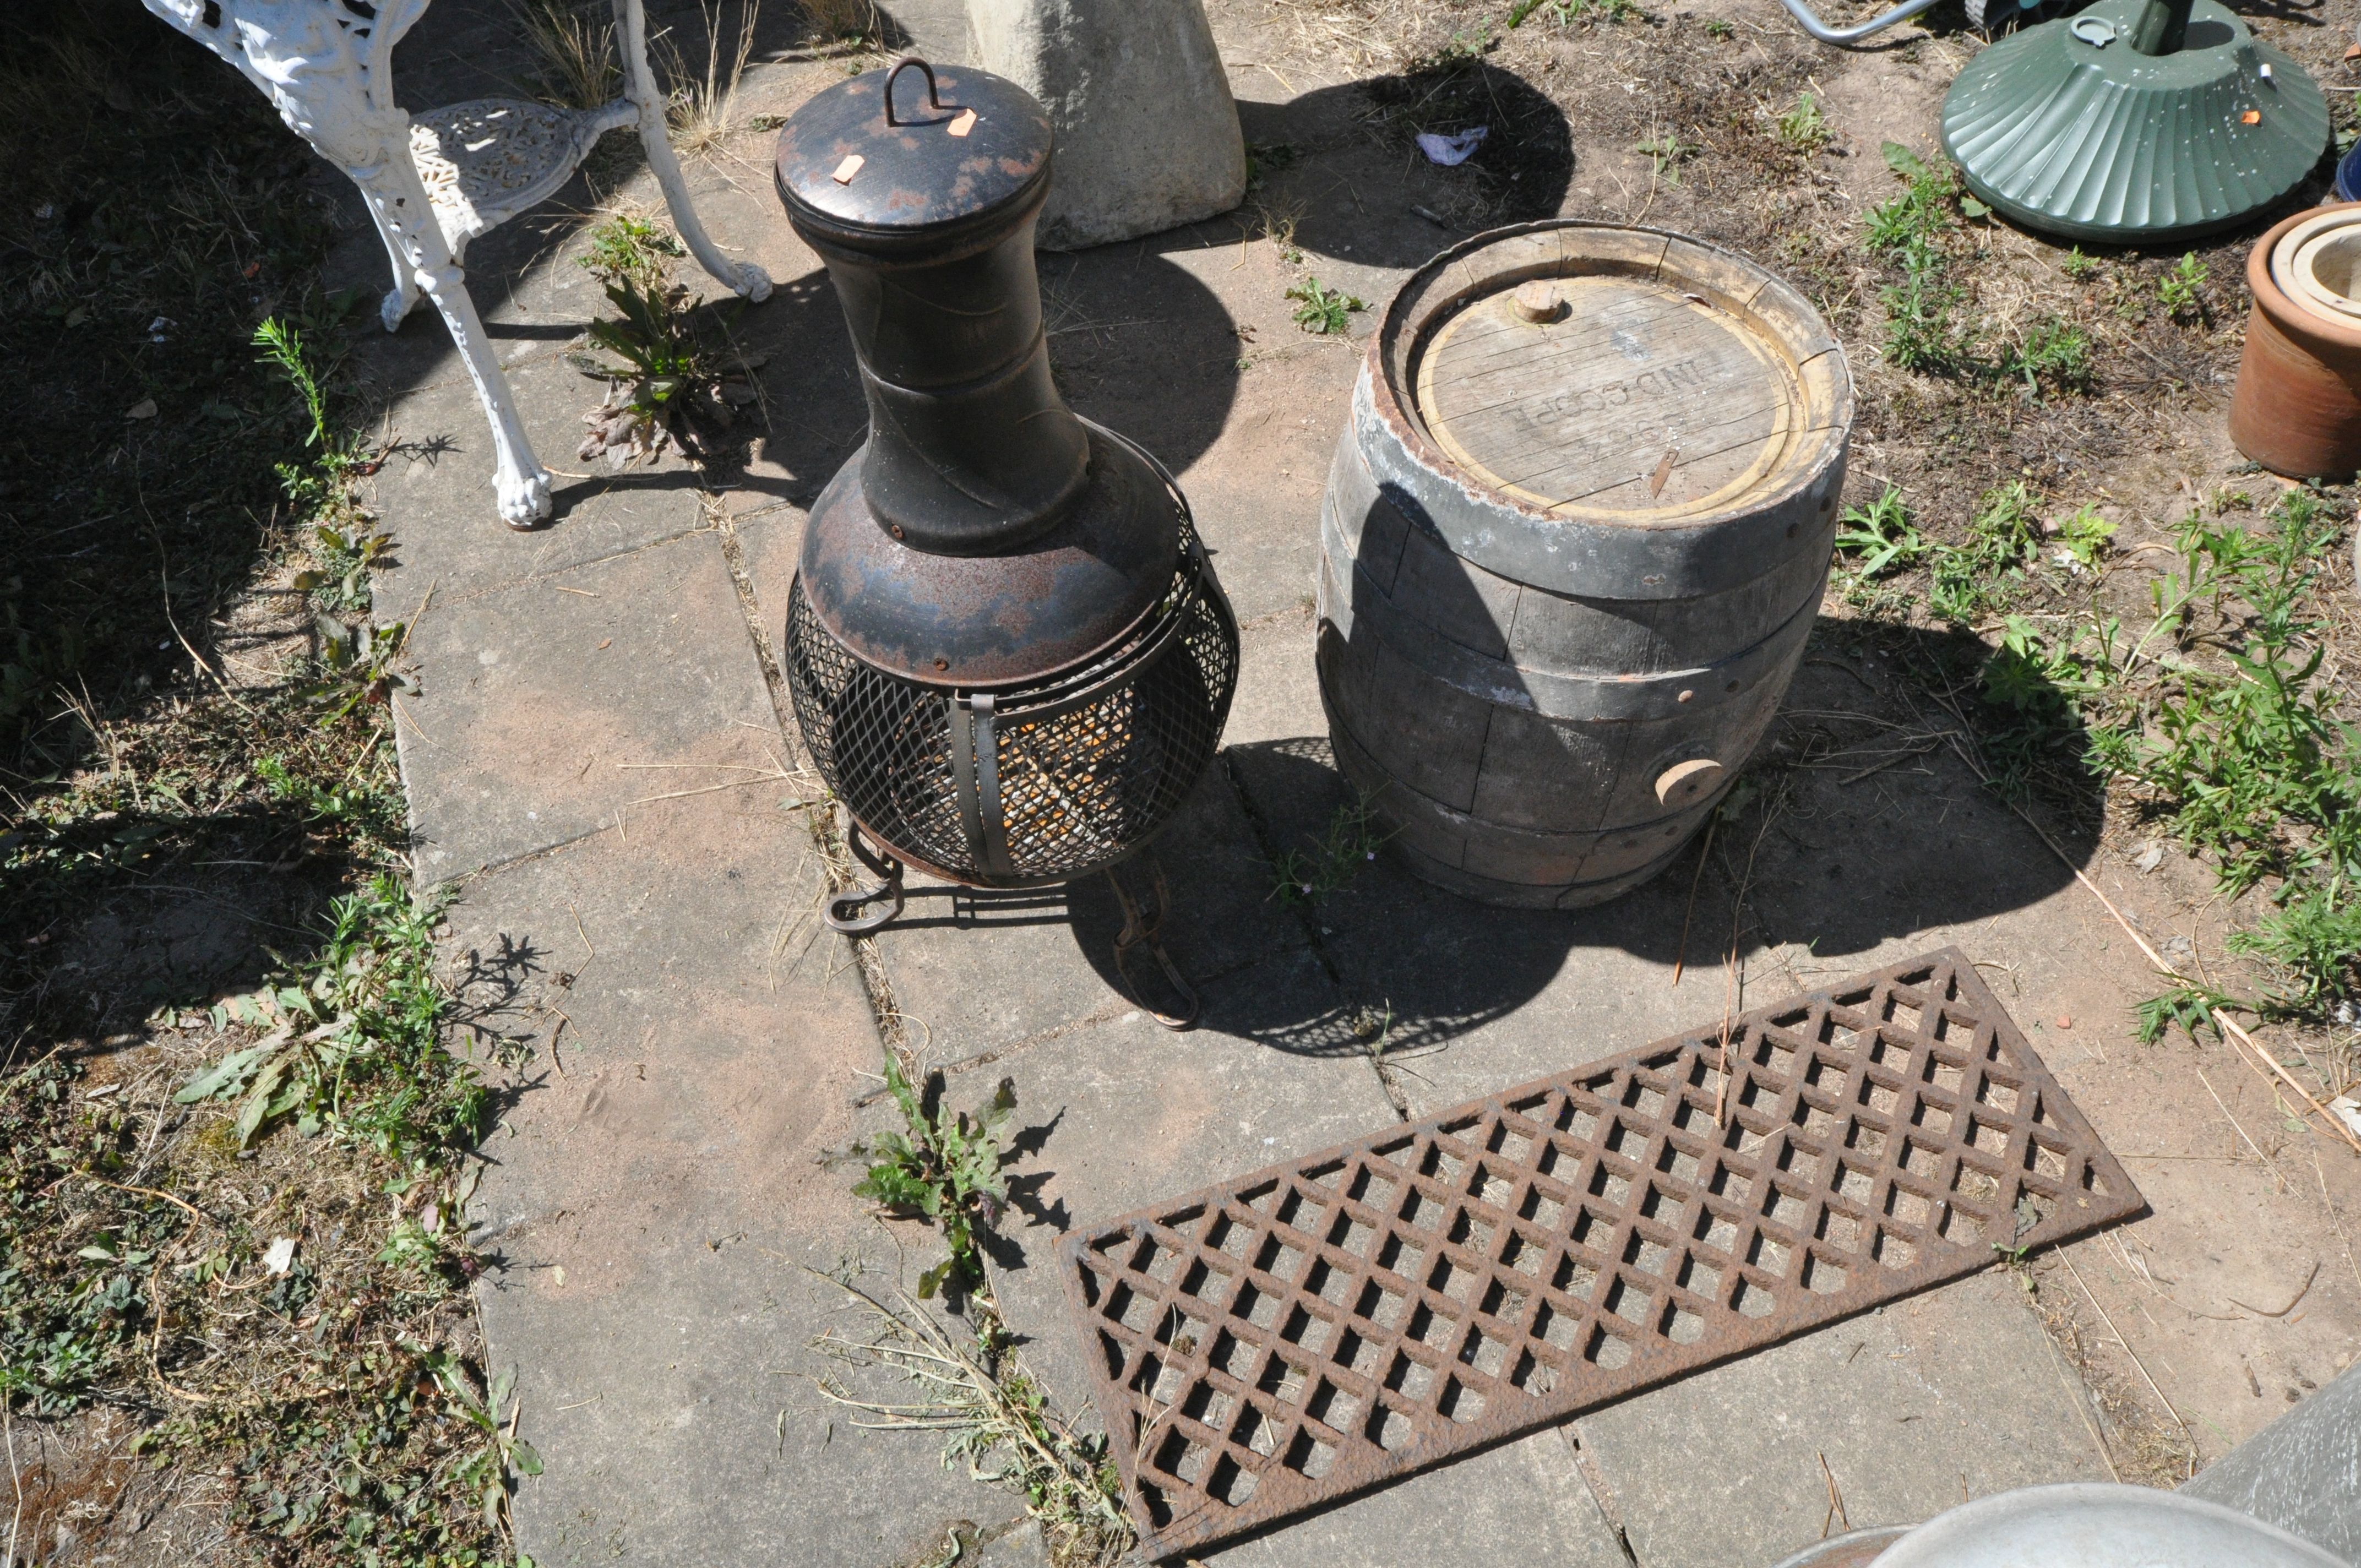 AN IND COOPE COOPERED BARREL, diameter 42cm x height 53cm, along with a metal chiminea, and a cast